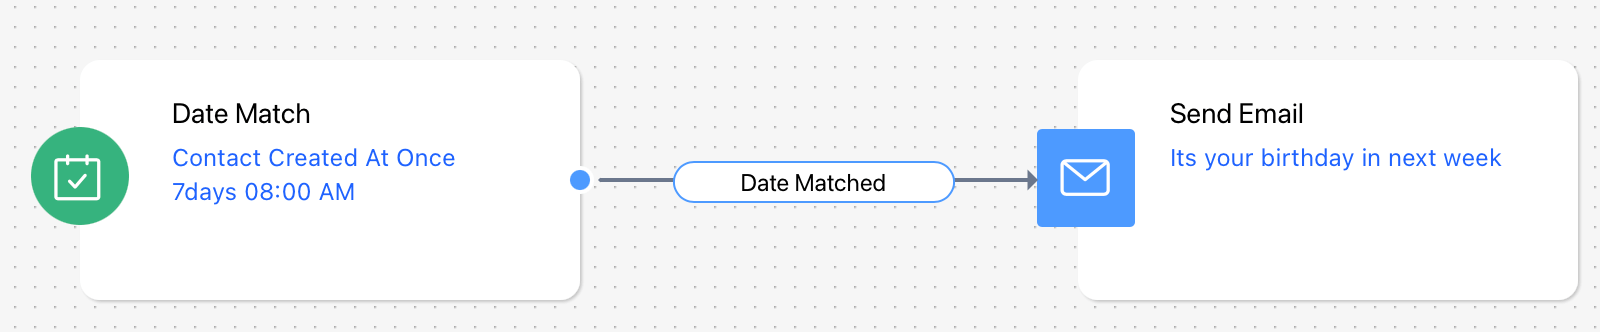 date_match_usecase.png